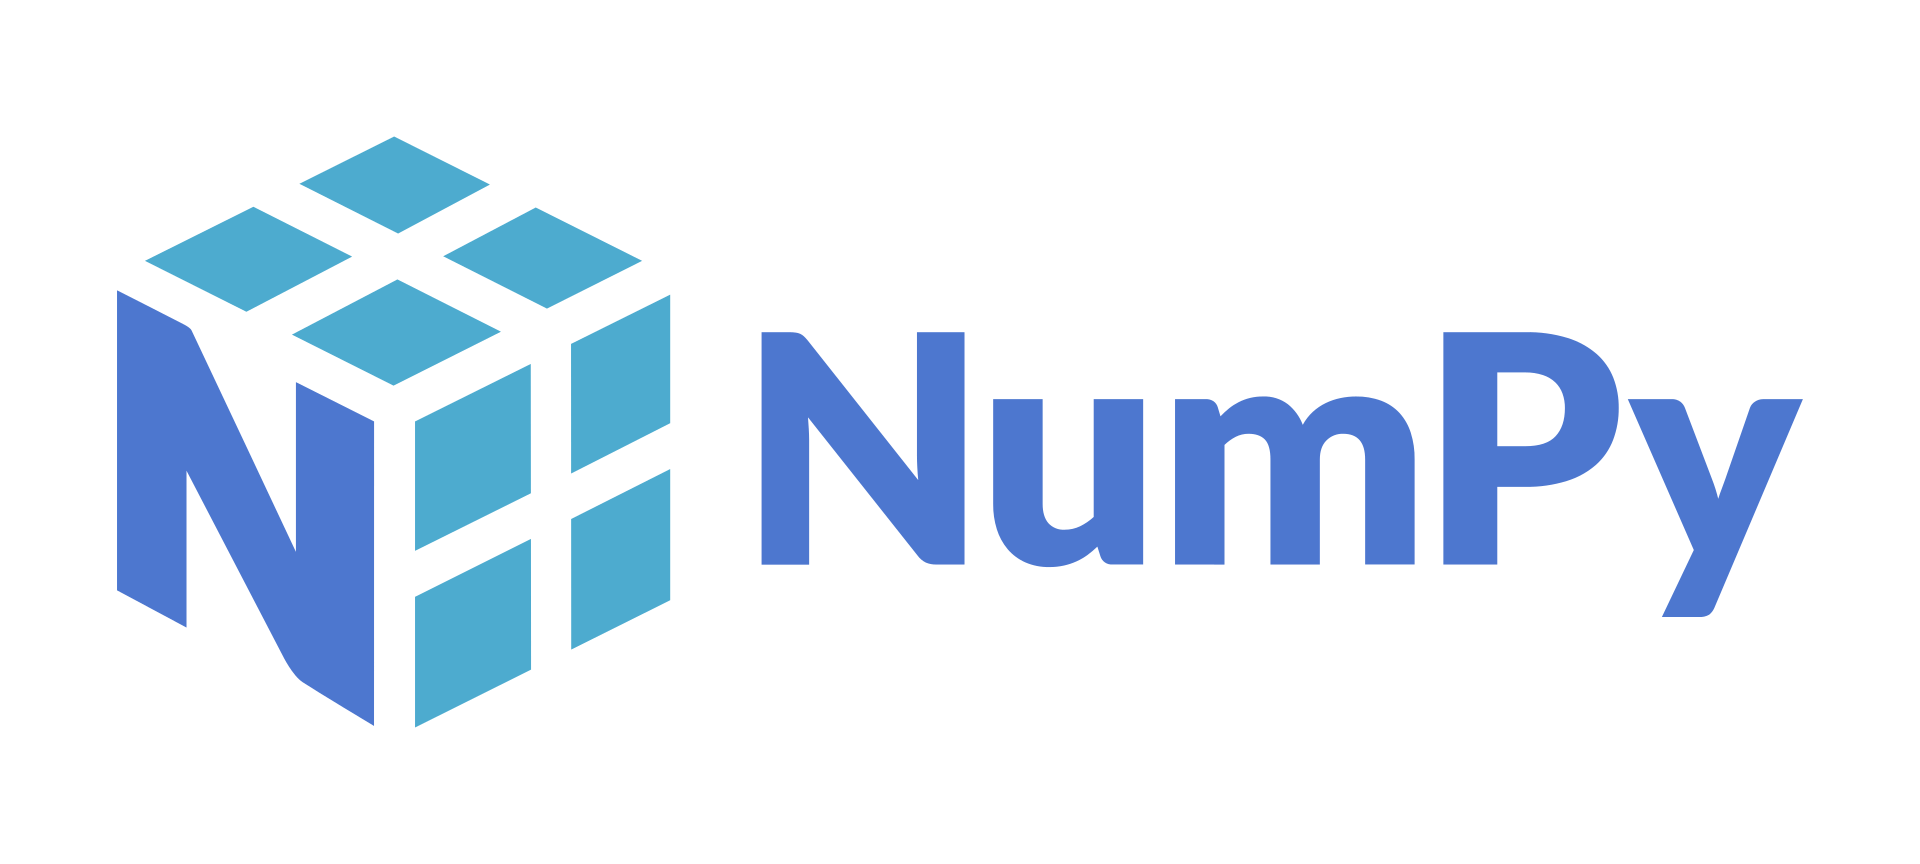 Python NumPy Crash Course – How to Build N-Dimensional Arrays for Machine Learning